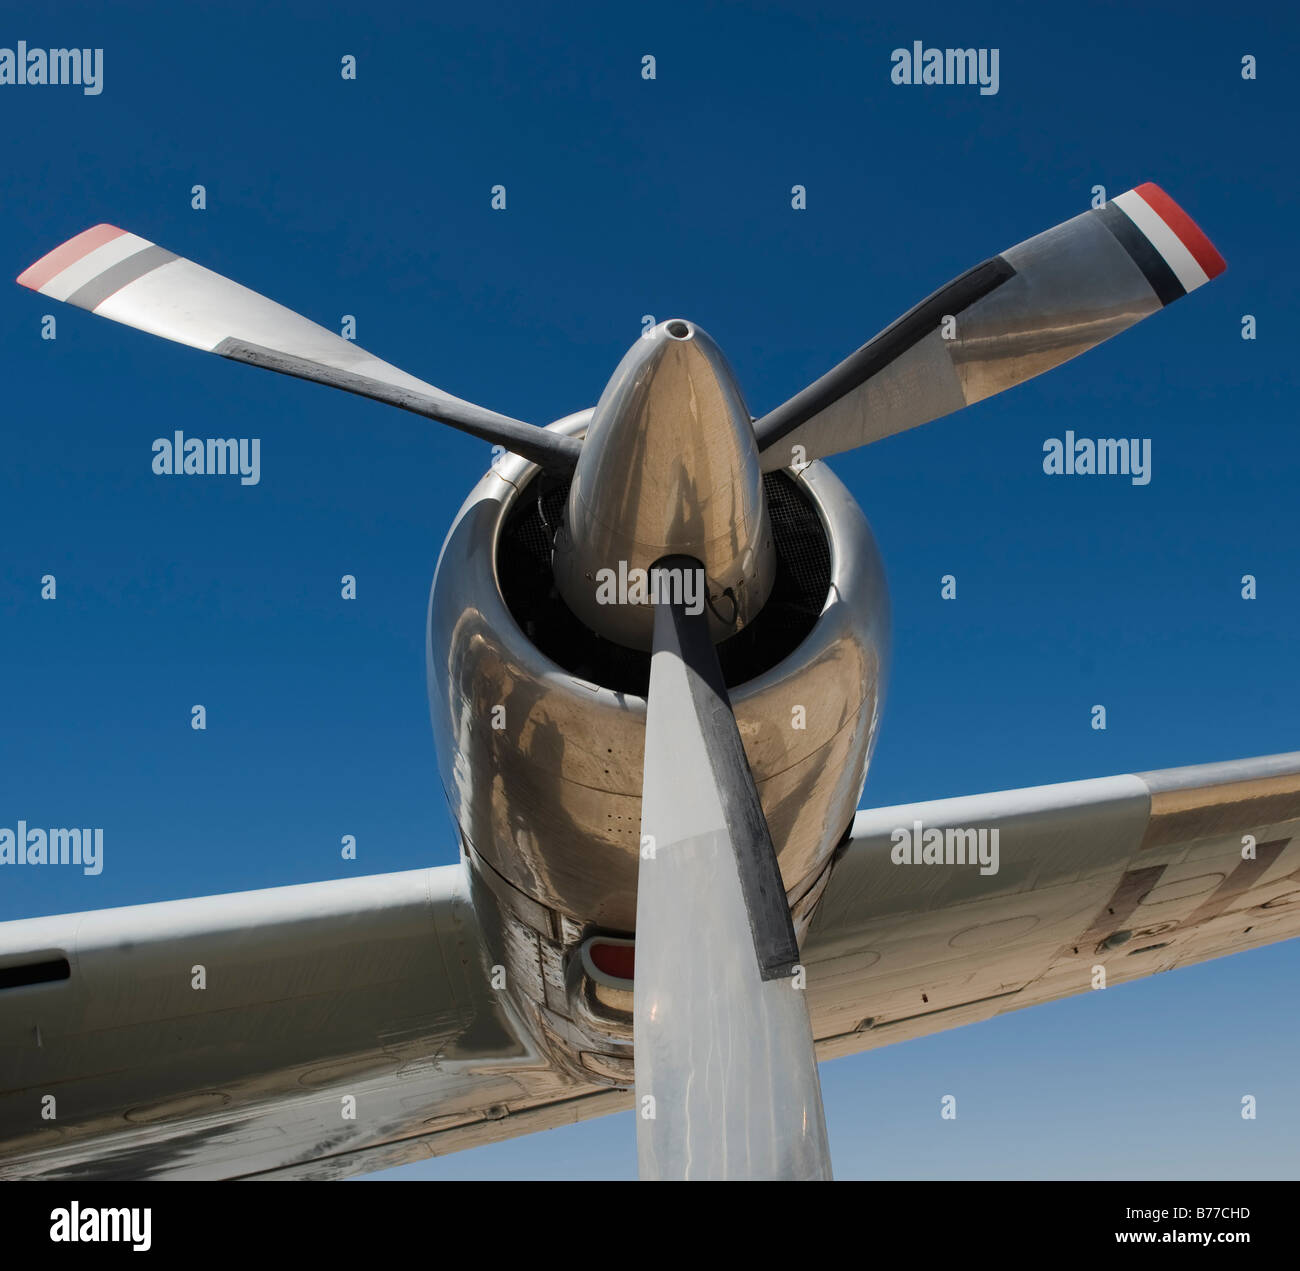 Propellor of Constellation airplane Stock Photo